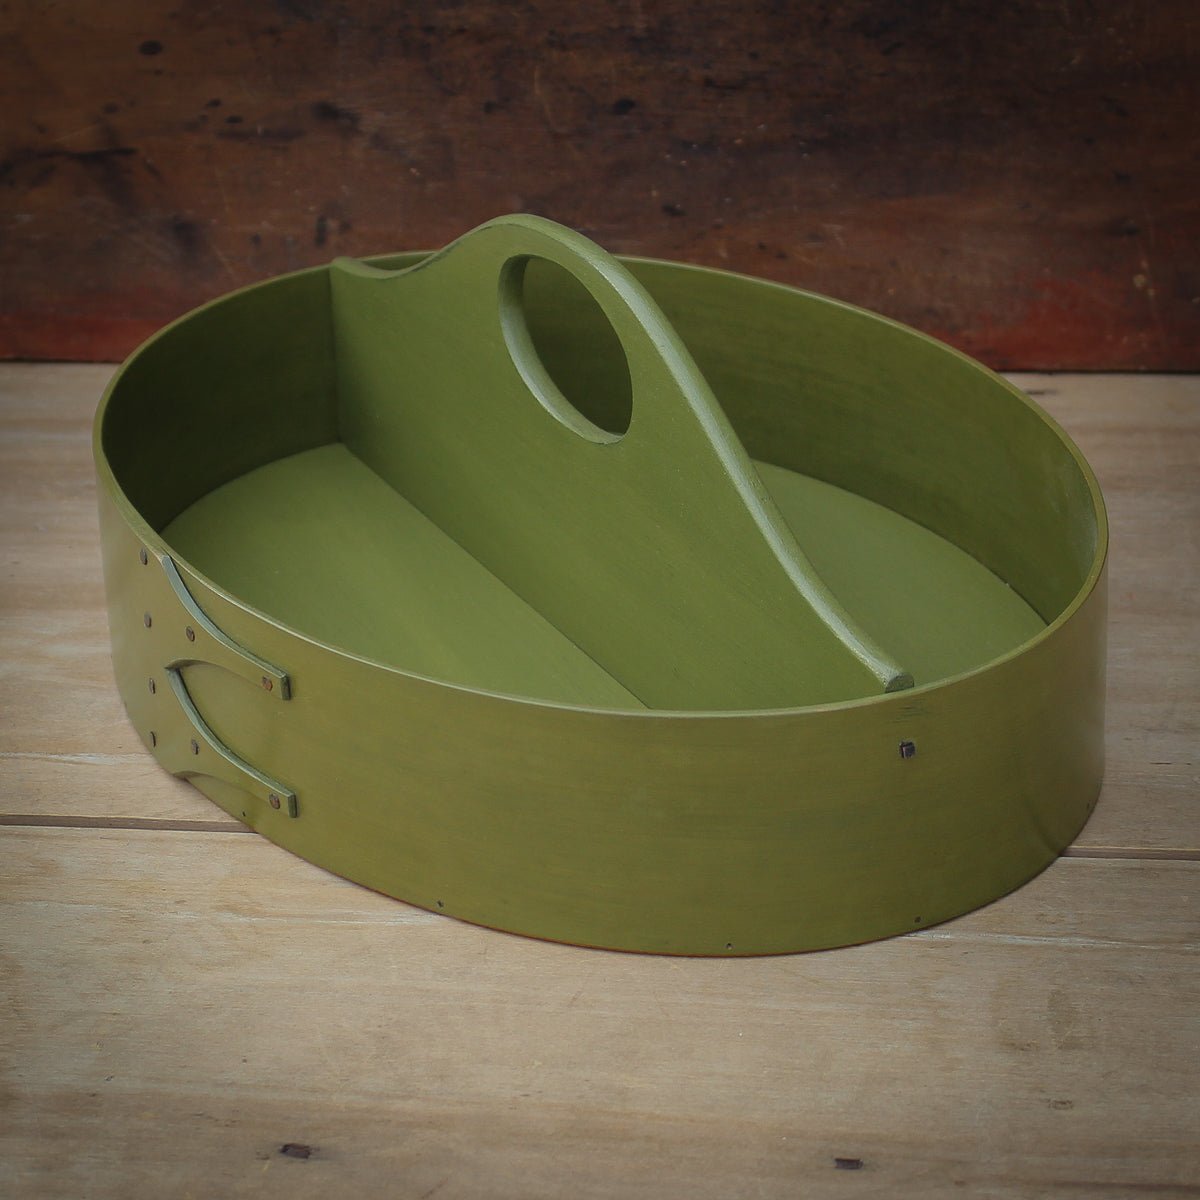 Shaker Style Divided Carrier, LeHays Shaker Boxes, Handcrafted in Maine, Green Milk Paint Finish, Side View